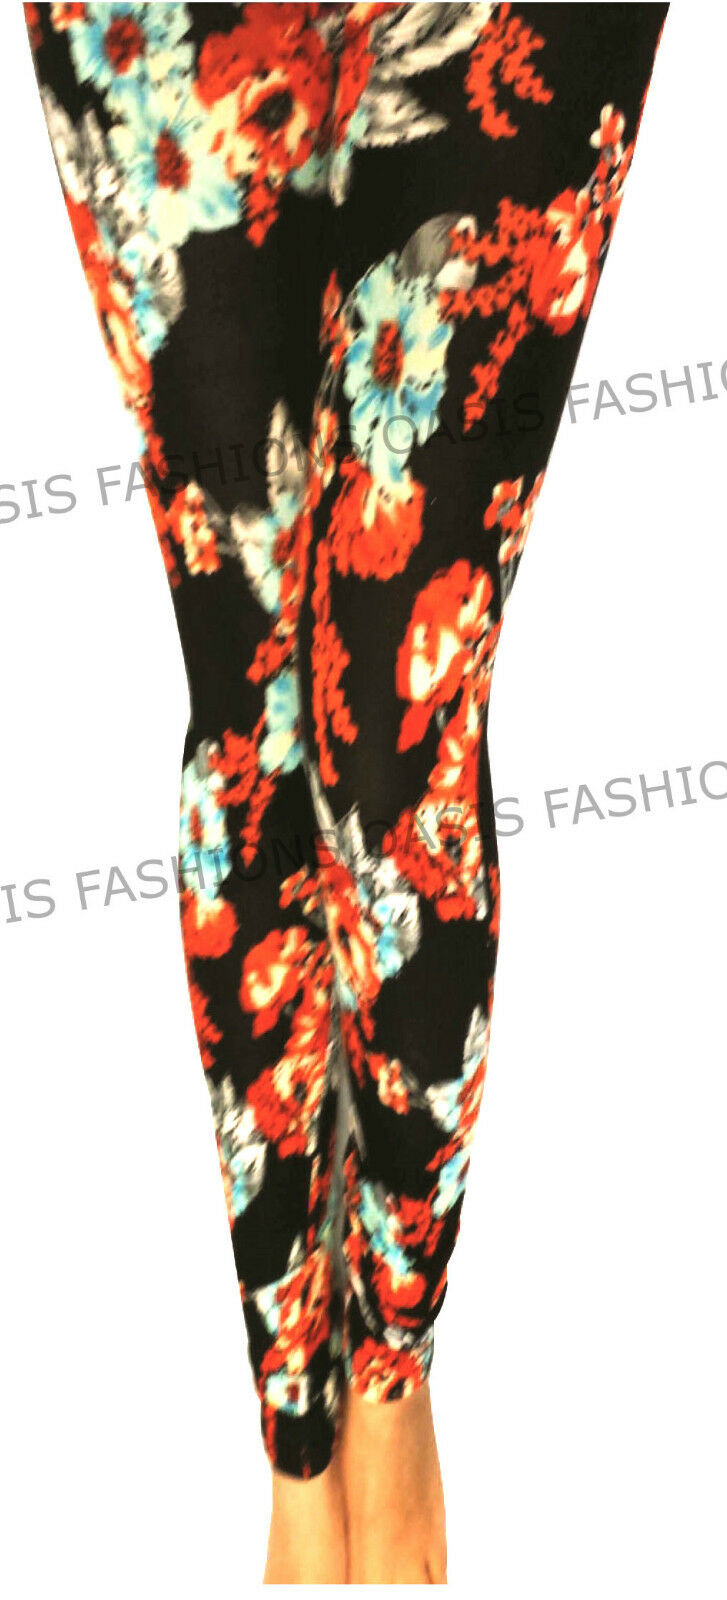 Ladies Floral Design Printed Leggings. Available In Sizes Small To Large (UK 8-14)